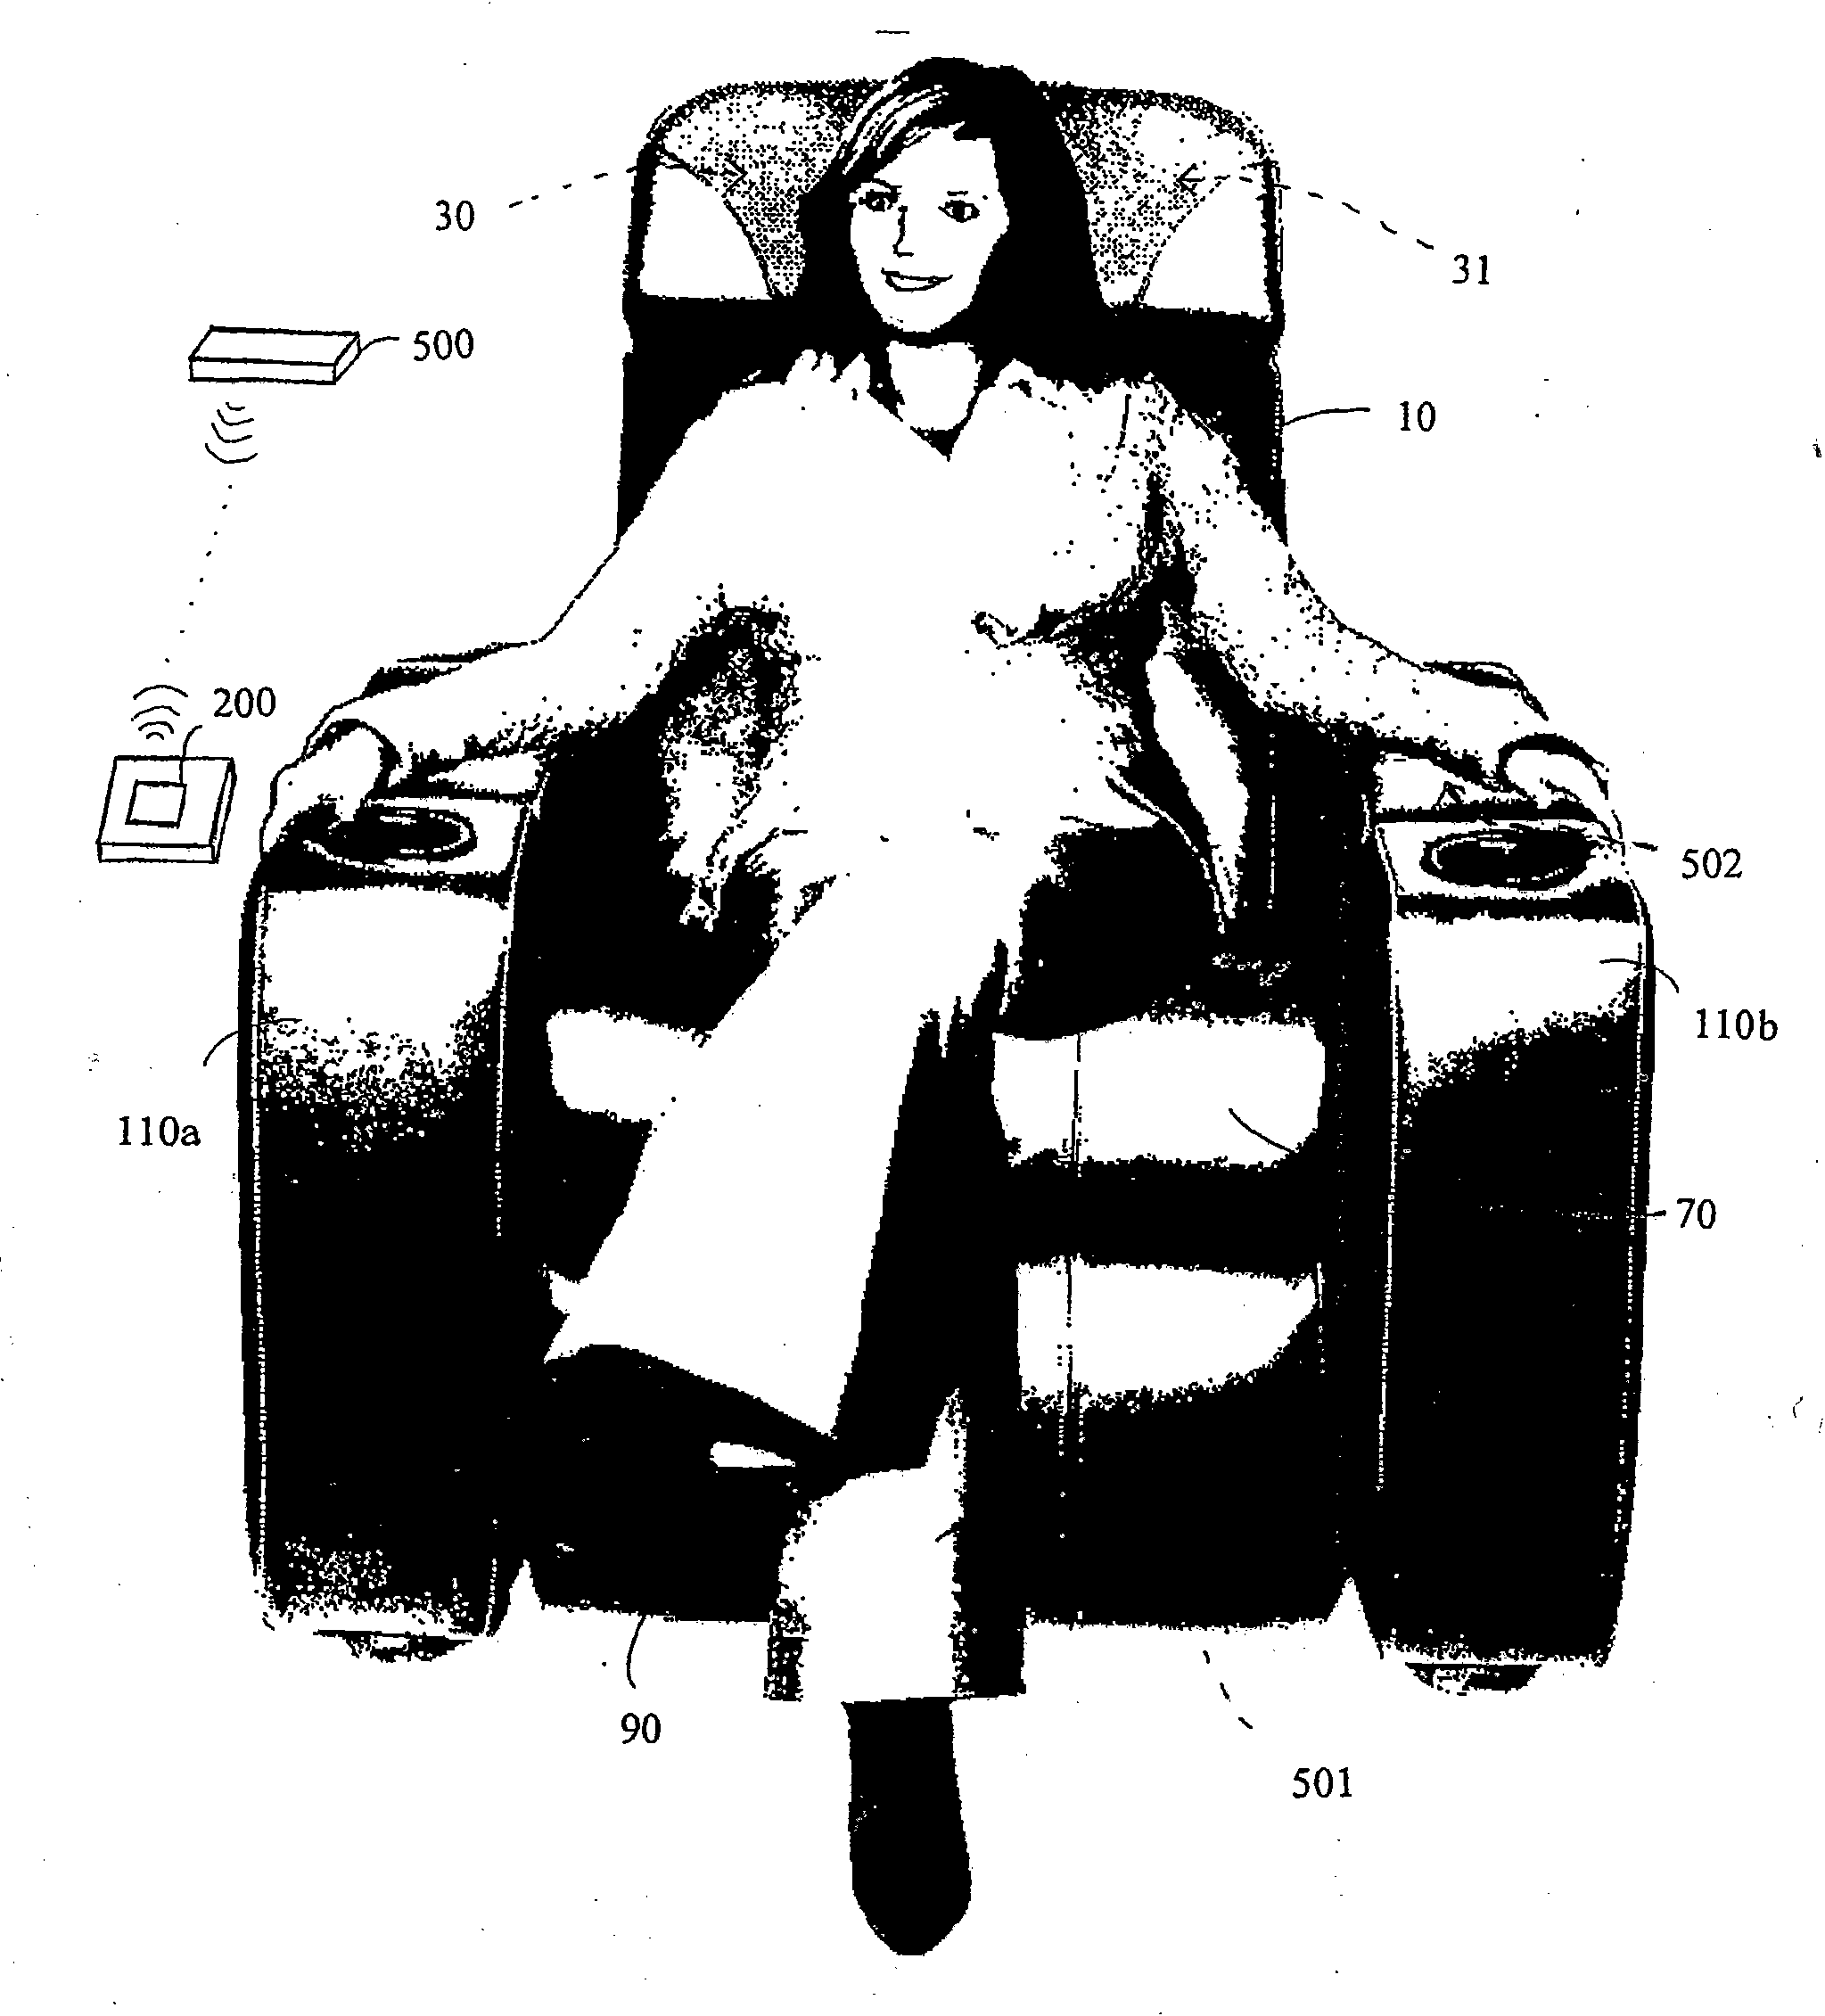 Chair and system for transmitting sound and vibration